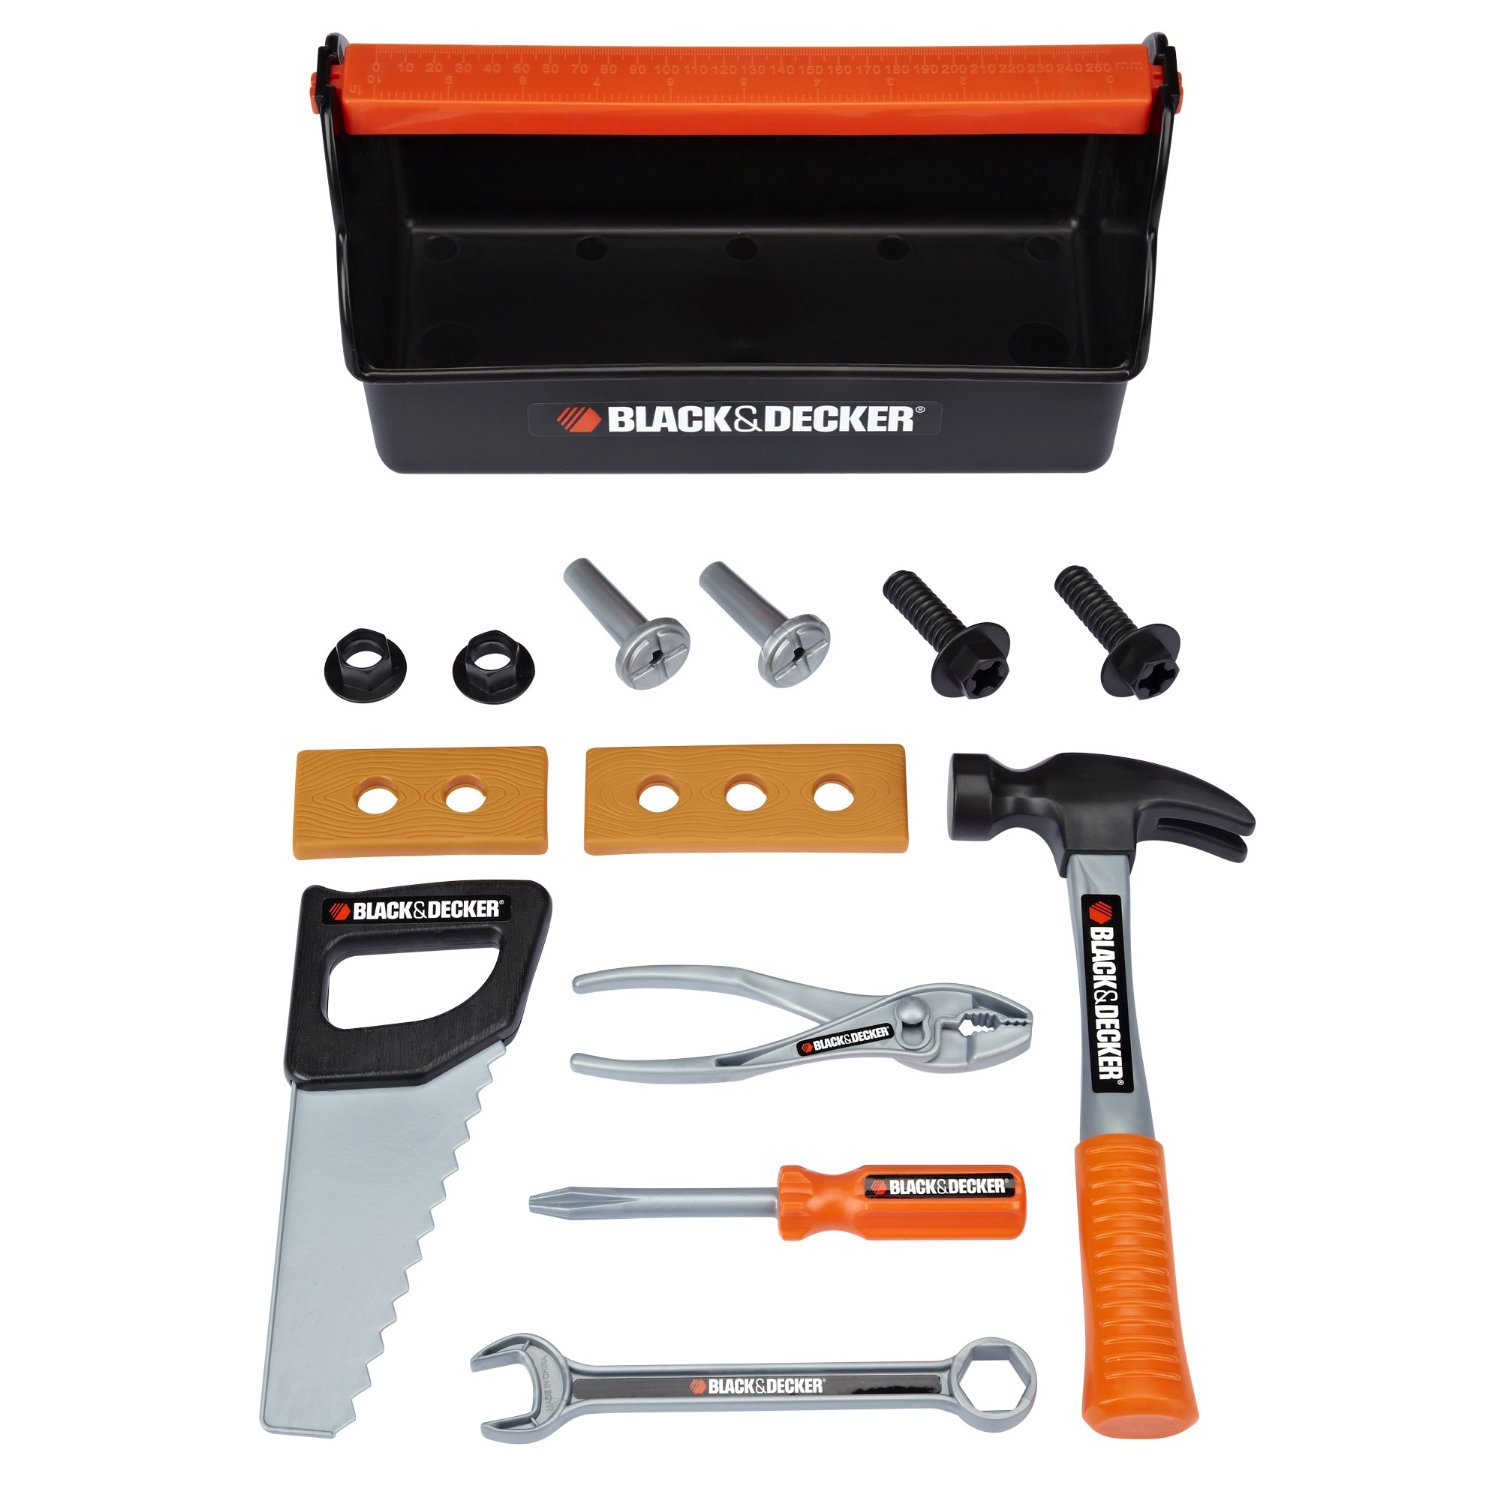 Amazon: Black & Decker Jr. Tool Box Only $8.75! Includes 14 Tools & Accessories!